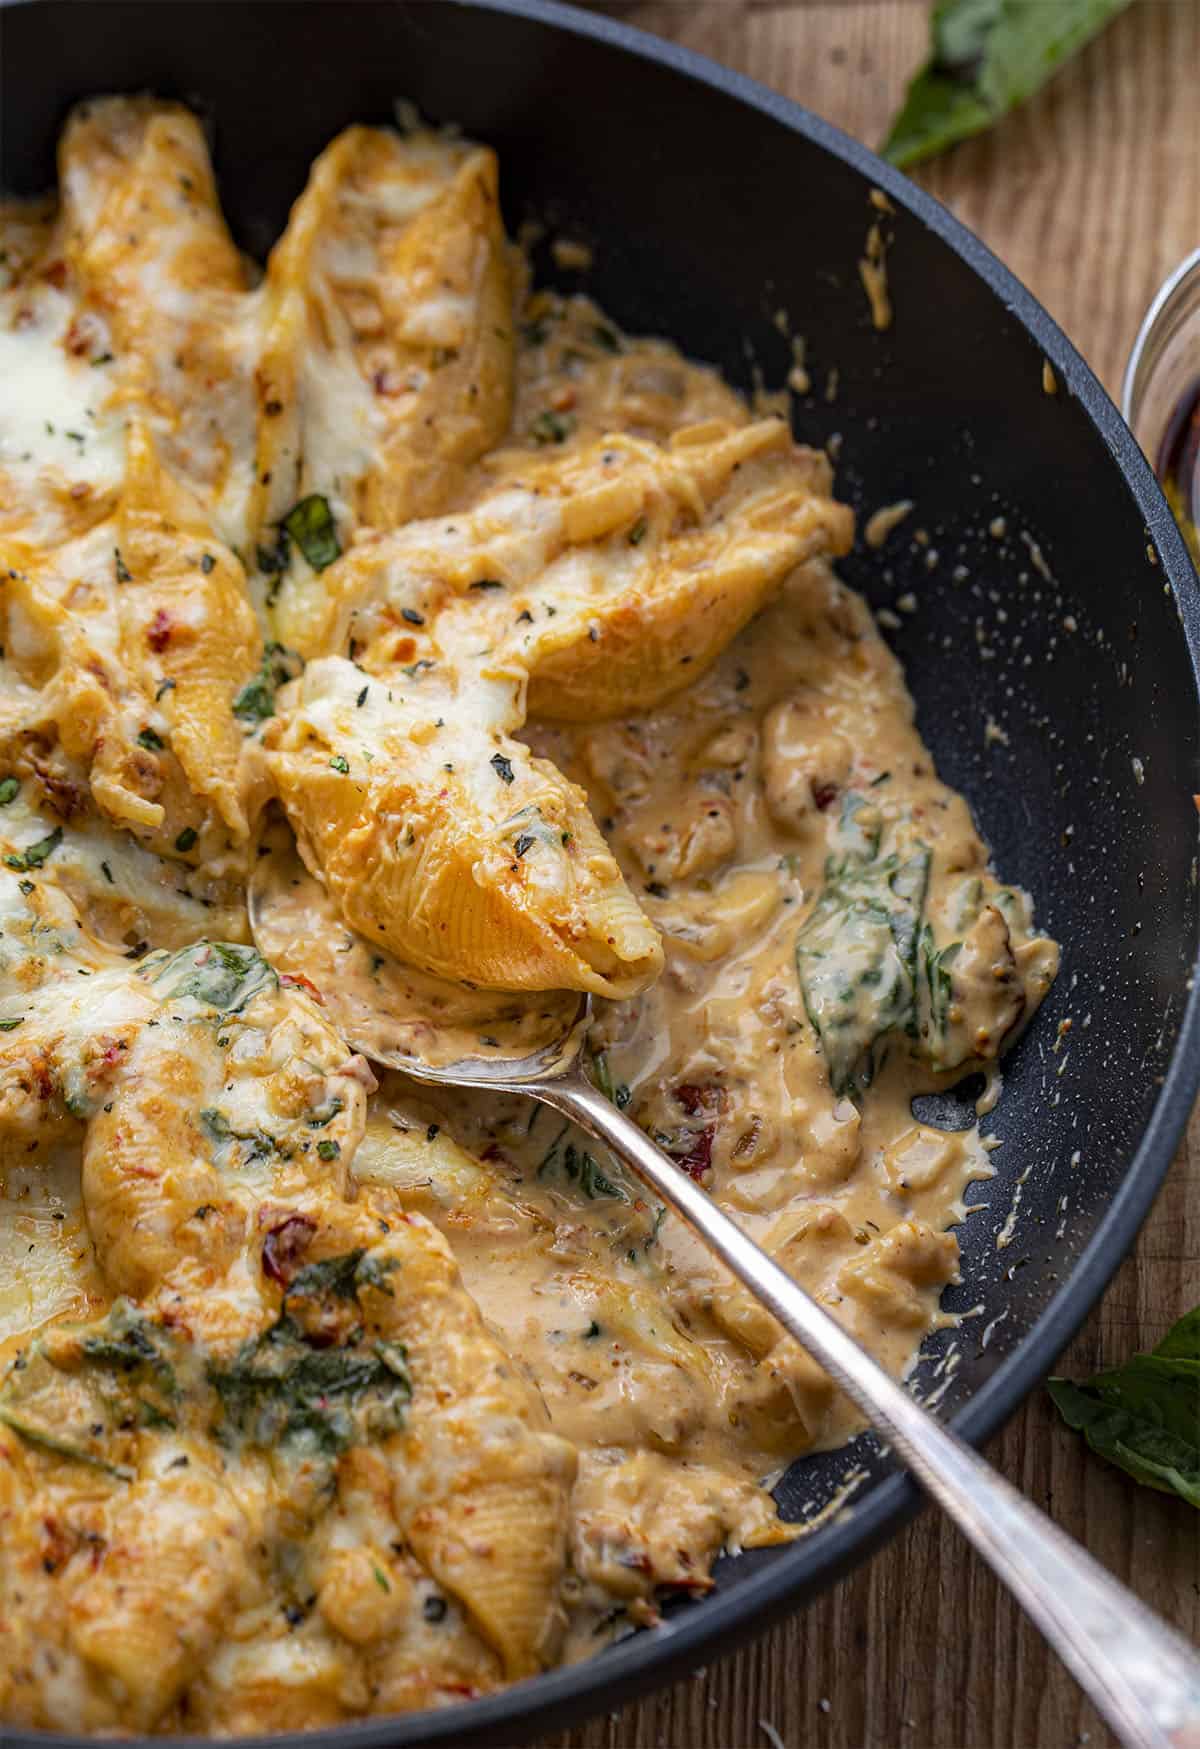 Skillet of Tuscan Stuffed Shells with Spoon